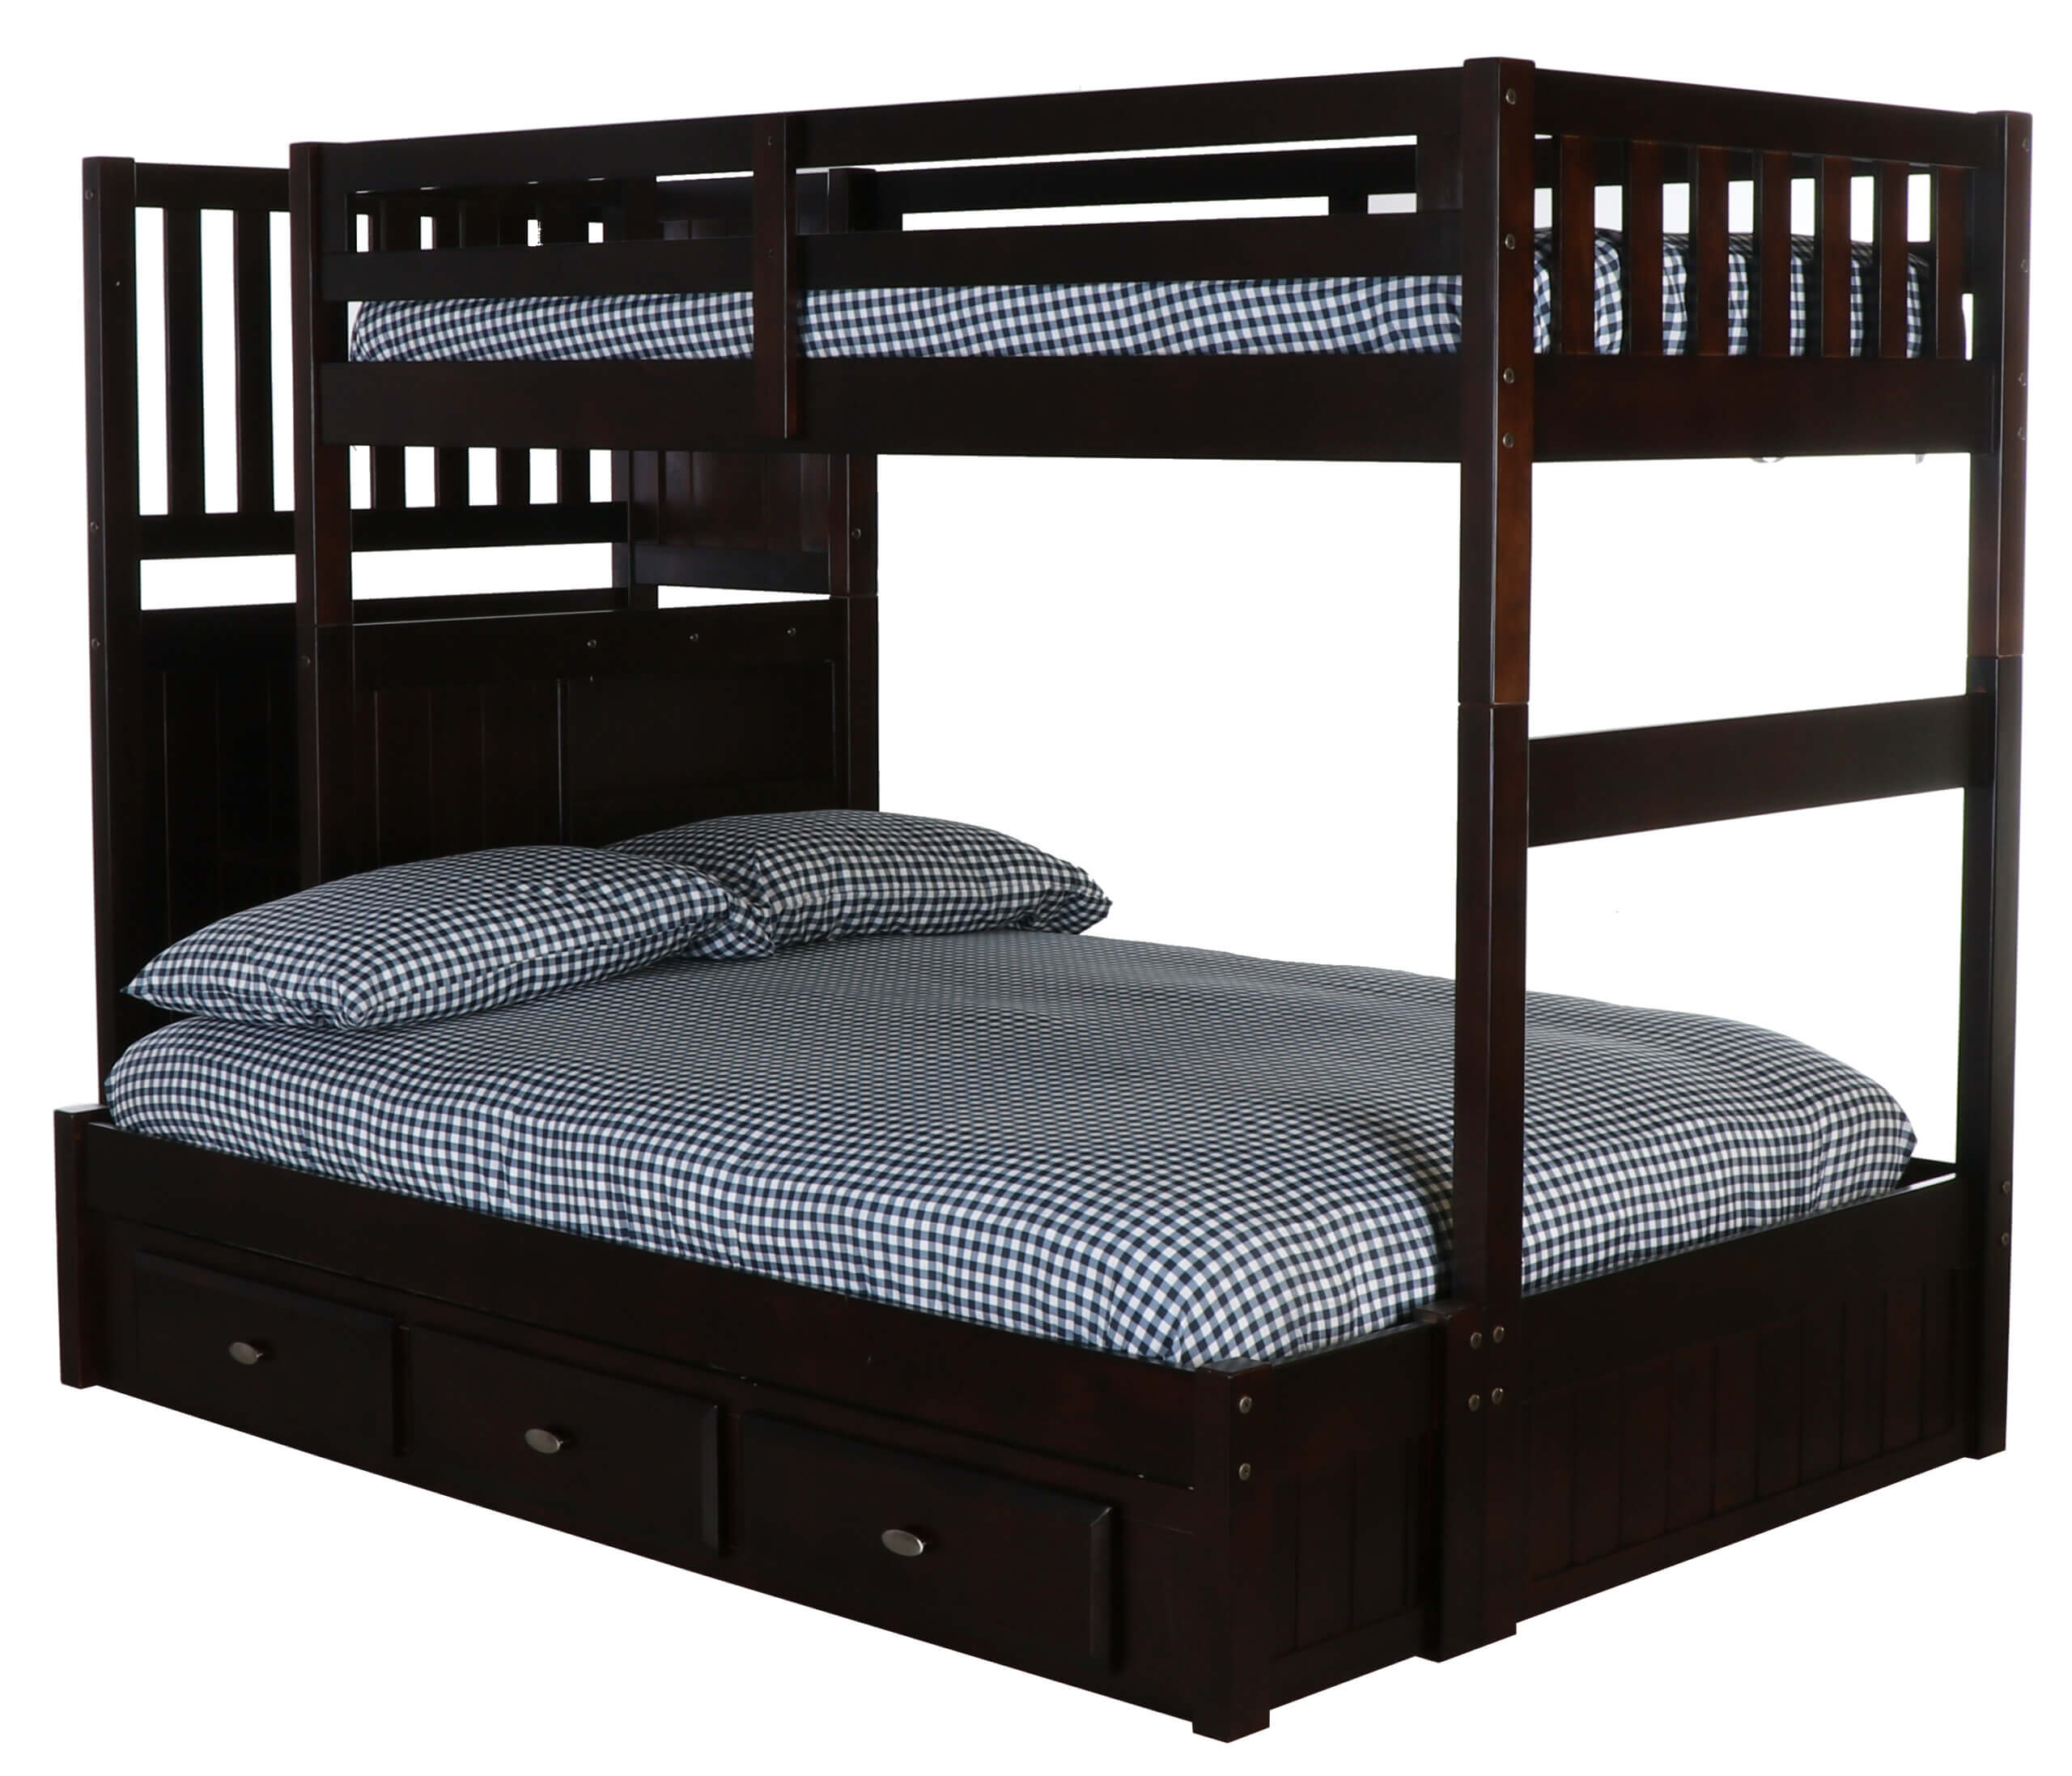 Espresso Staircase Bunk Bed All, Stairway Twin Bunk Bed Mattress